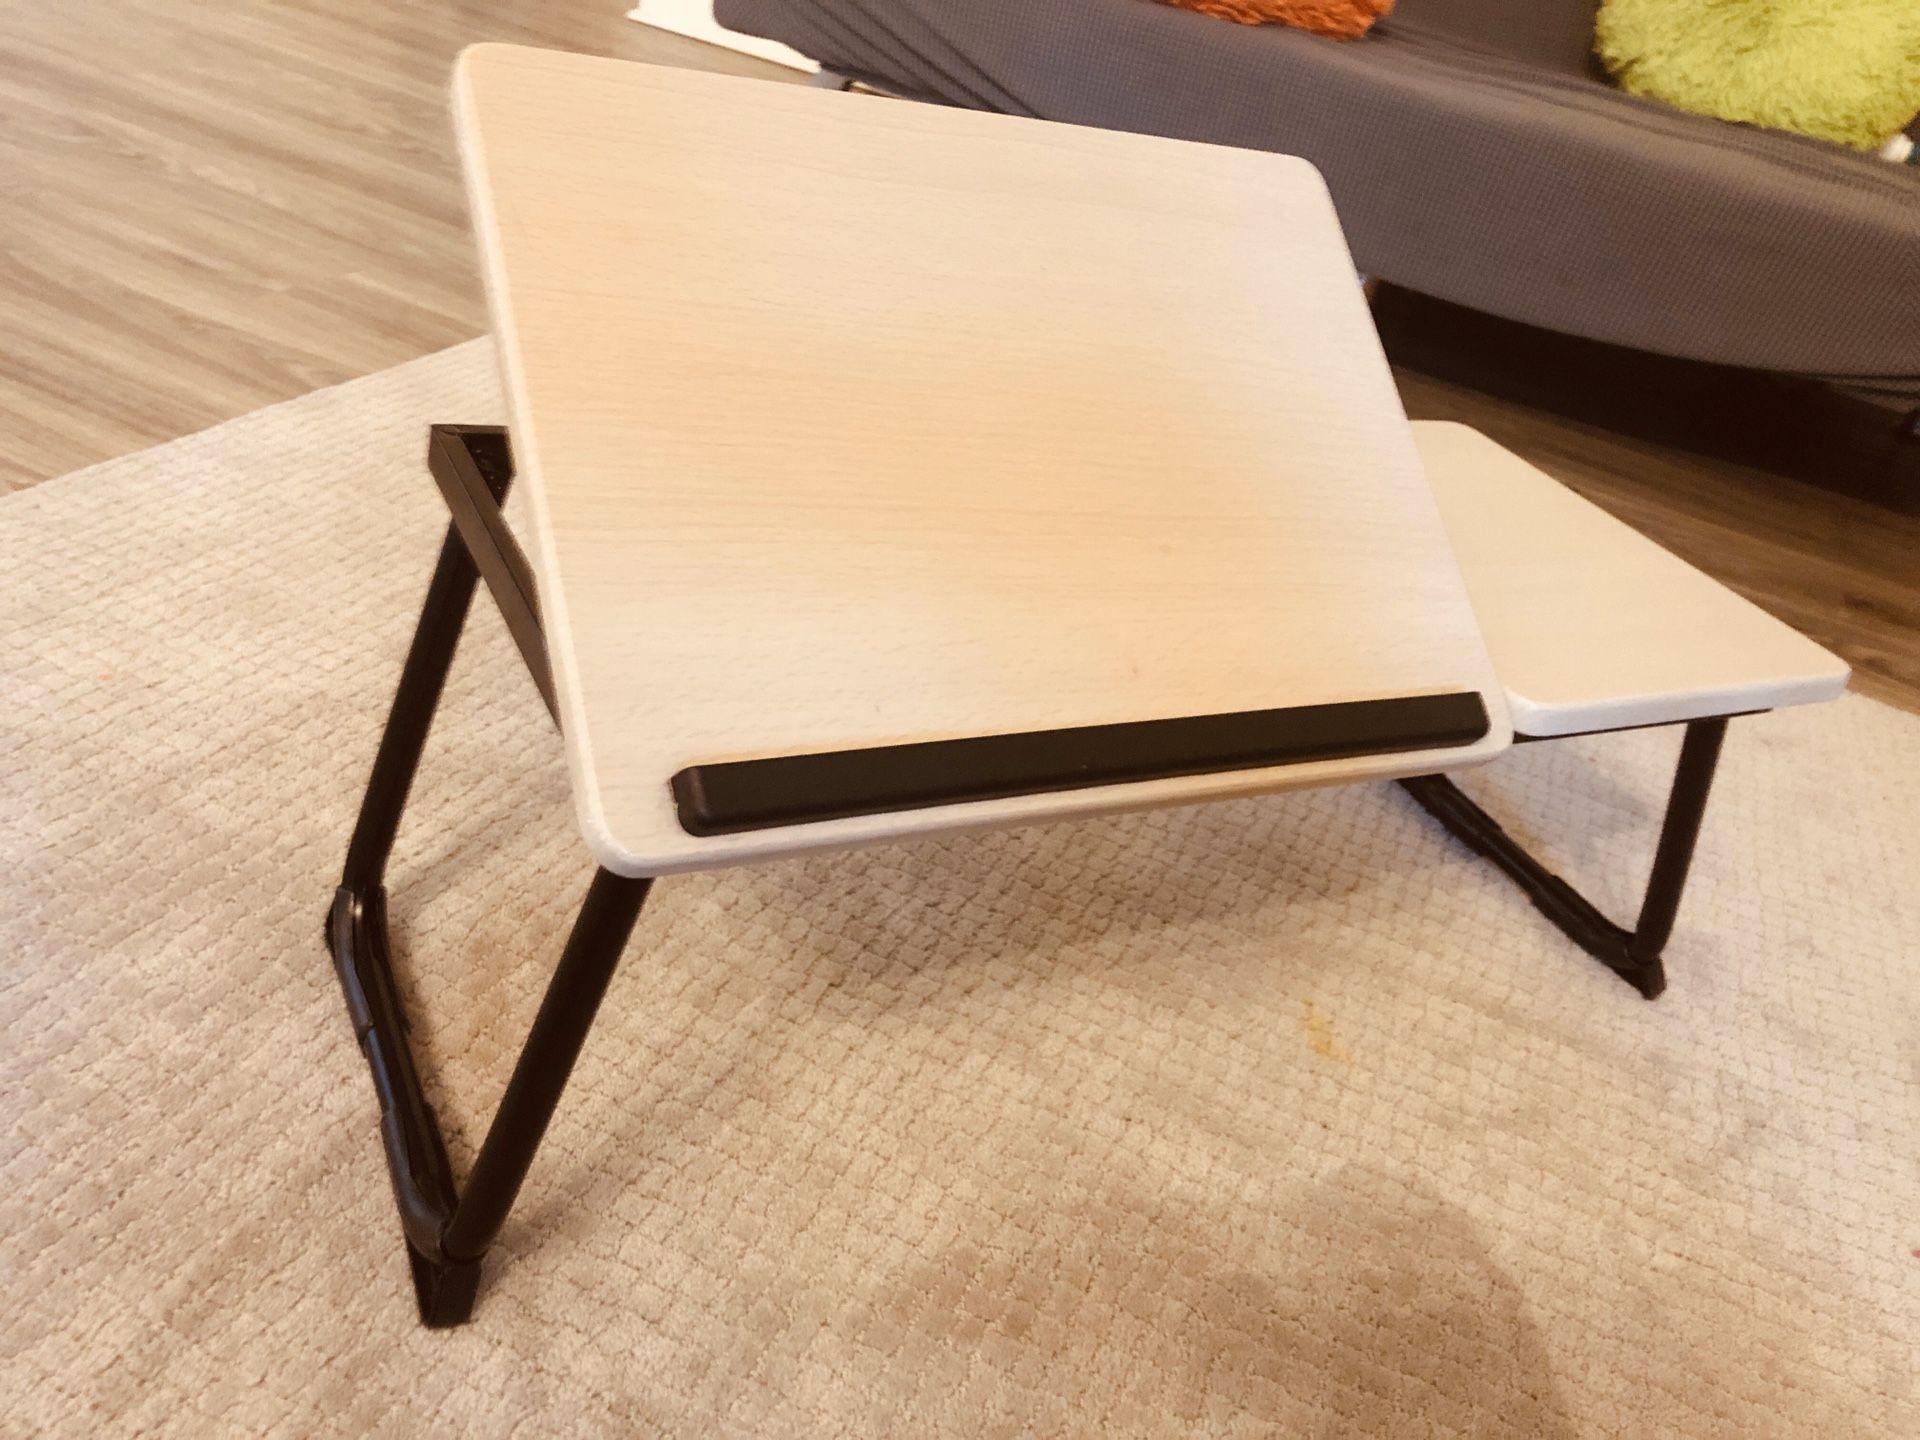 Adjustable Laptop / Bed Table